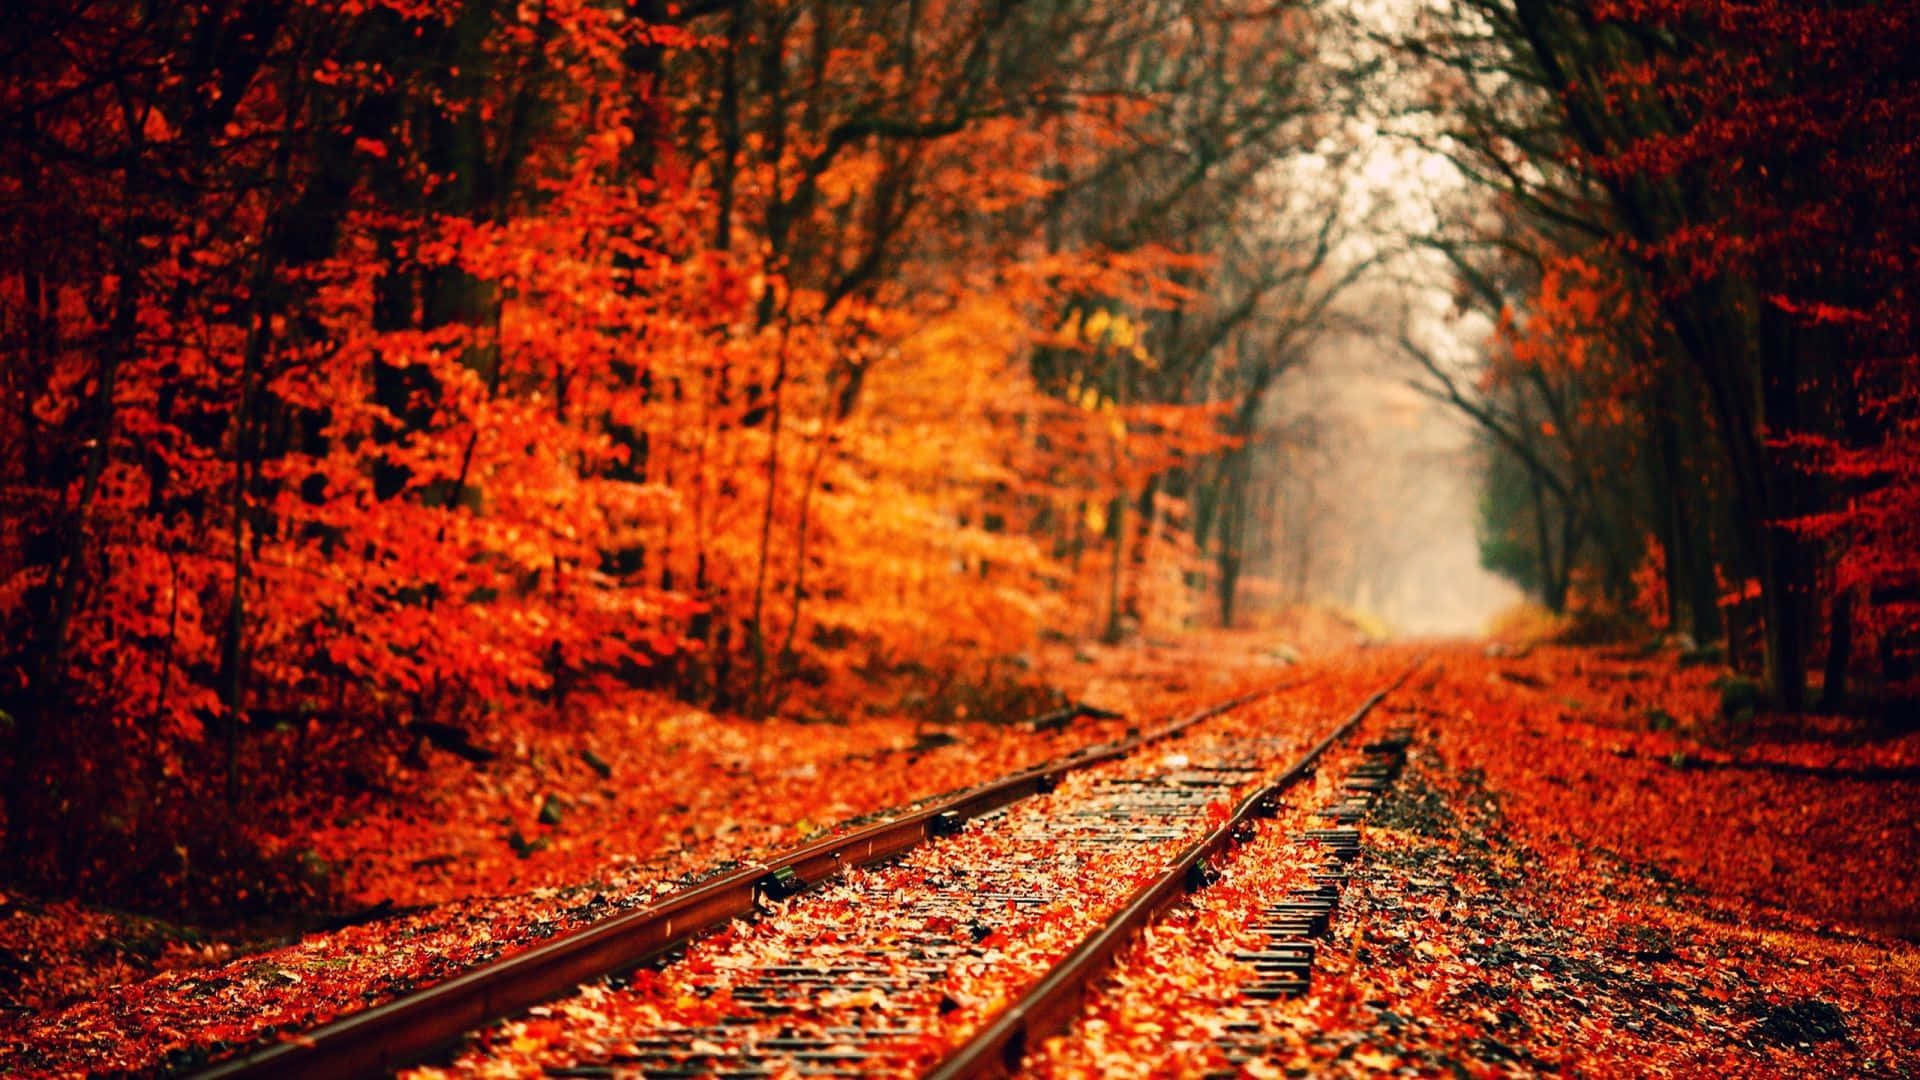 Celebrate autumn with this stunning orange, yellow and red fall aesthetic desktop wallpaper Wallpaper